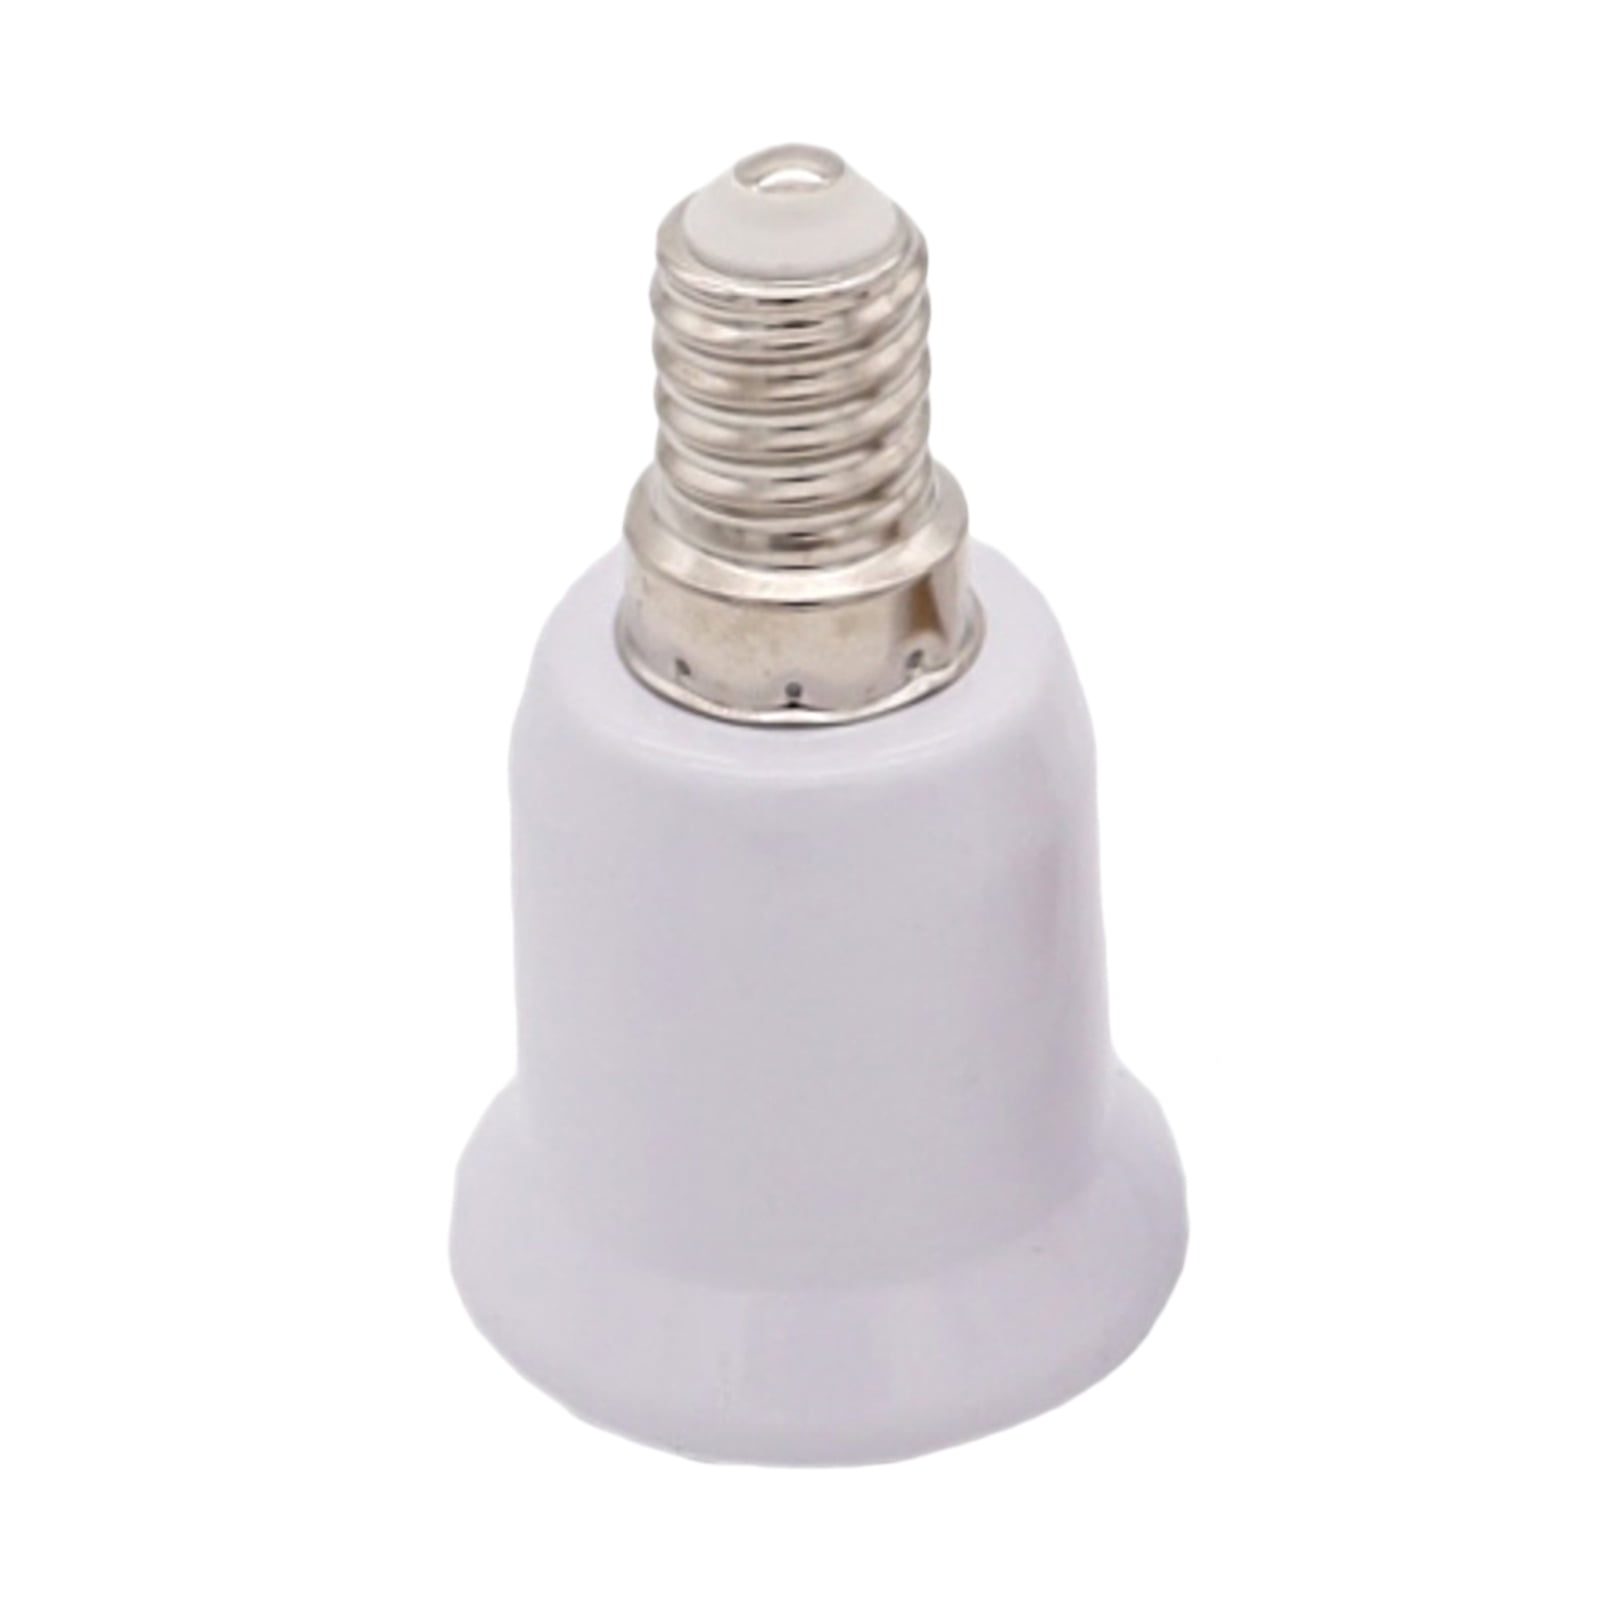 5 PACK Convert E27 Edison Screw ES to E14 Small SES Light Bulb Adapter Connector 